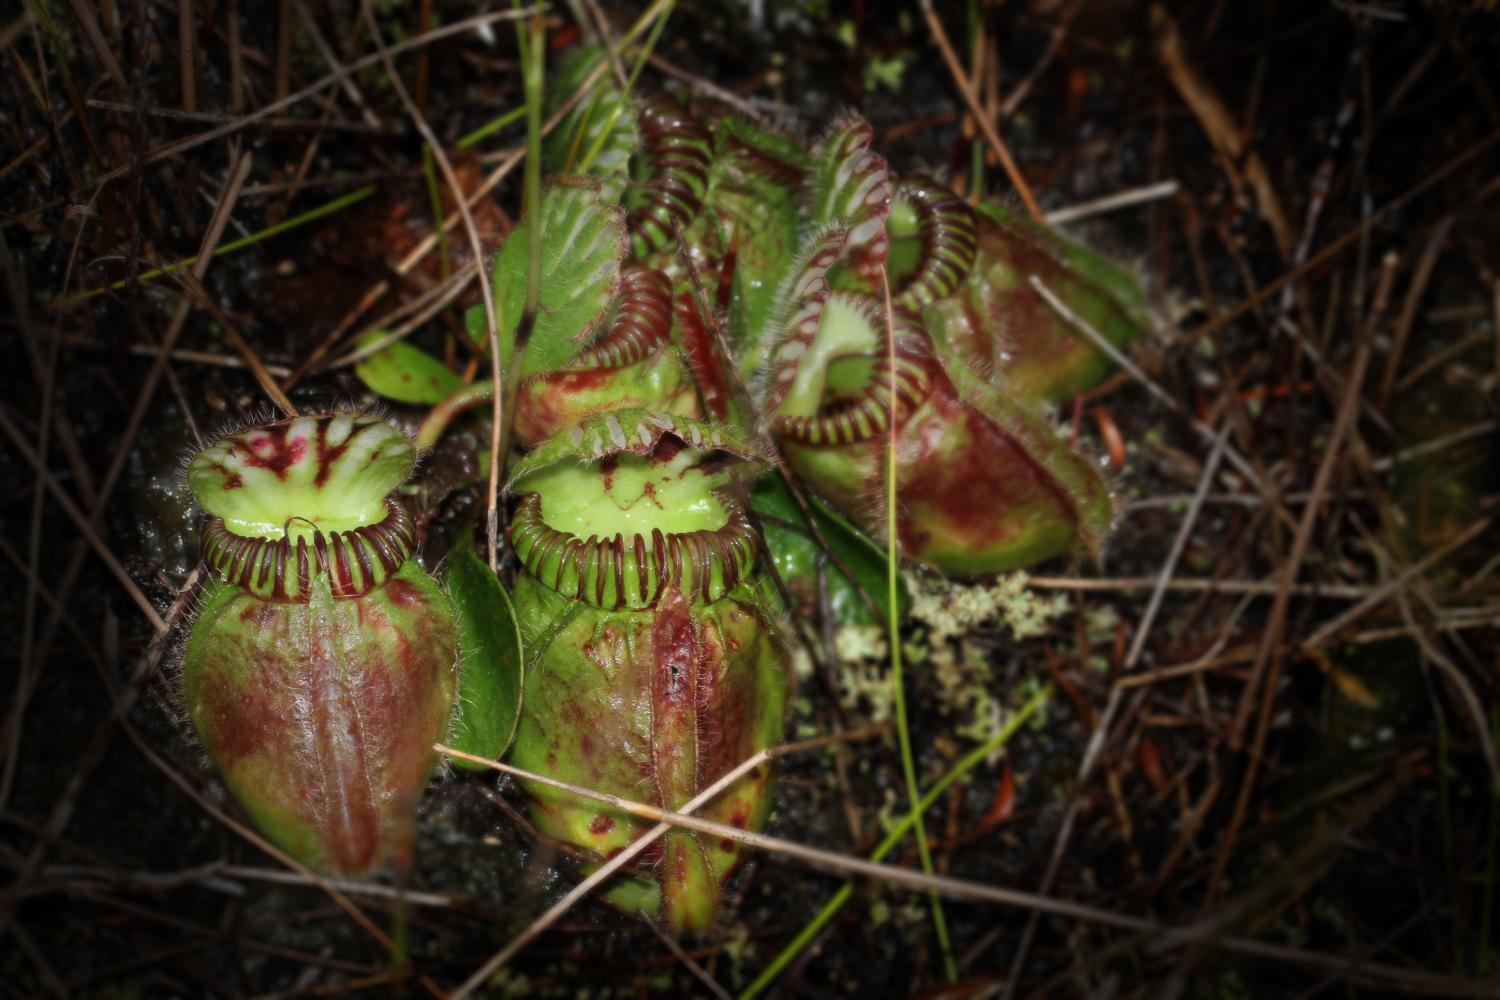 plan tigger Definere Study sheds light on how carnivorous plants acquired a taste for meat